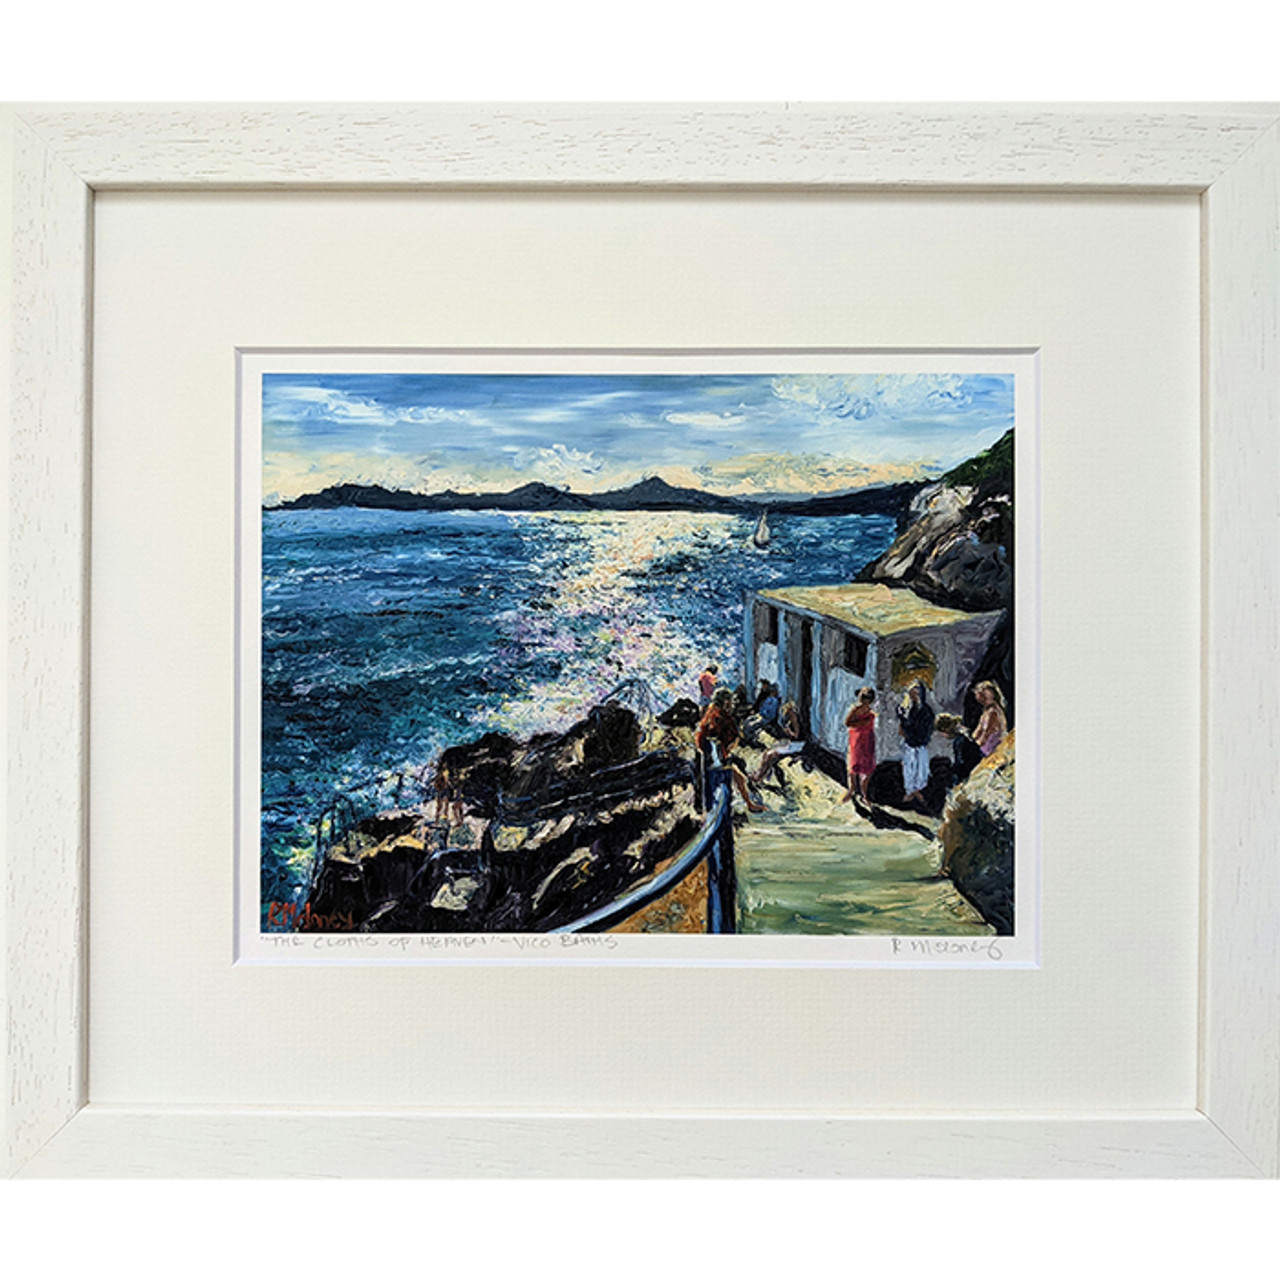 The Cloths of Heaven, Vico Baths – Signed Framed Print. Frame 11 x 13″